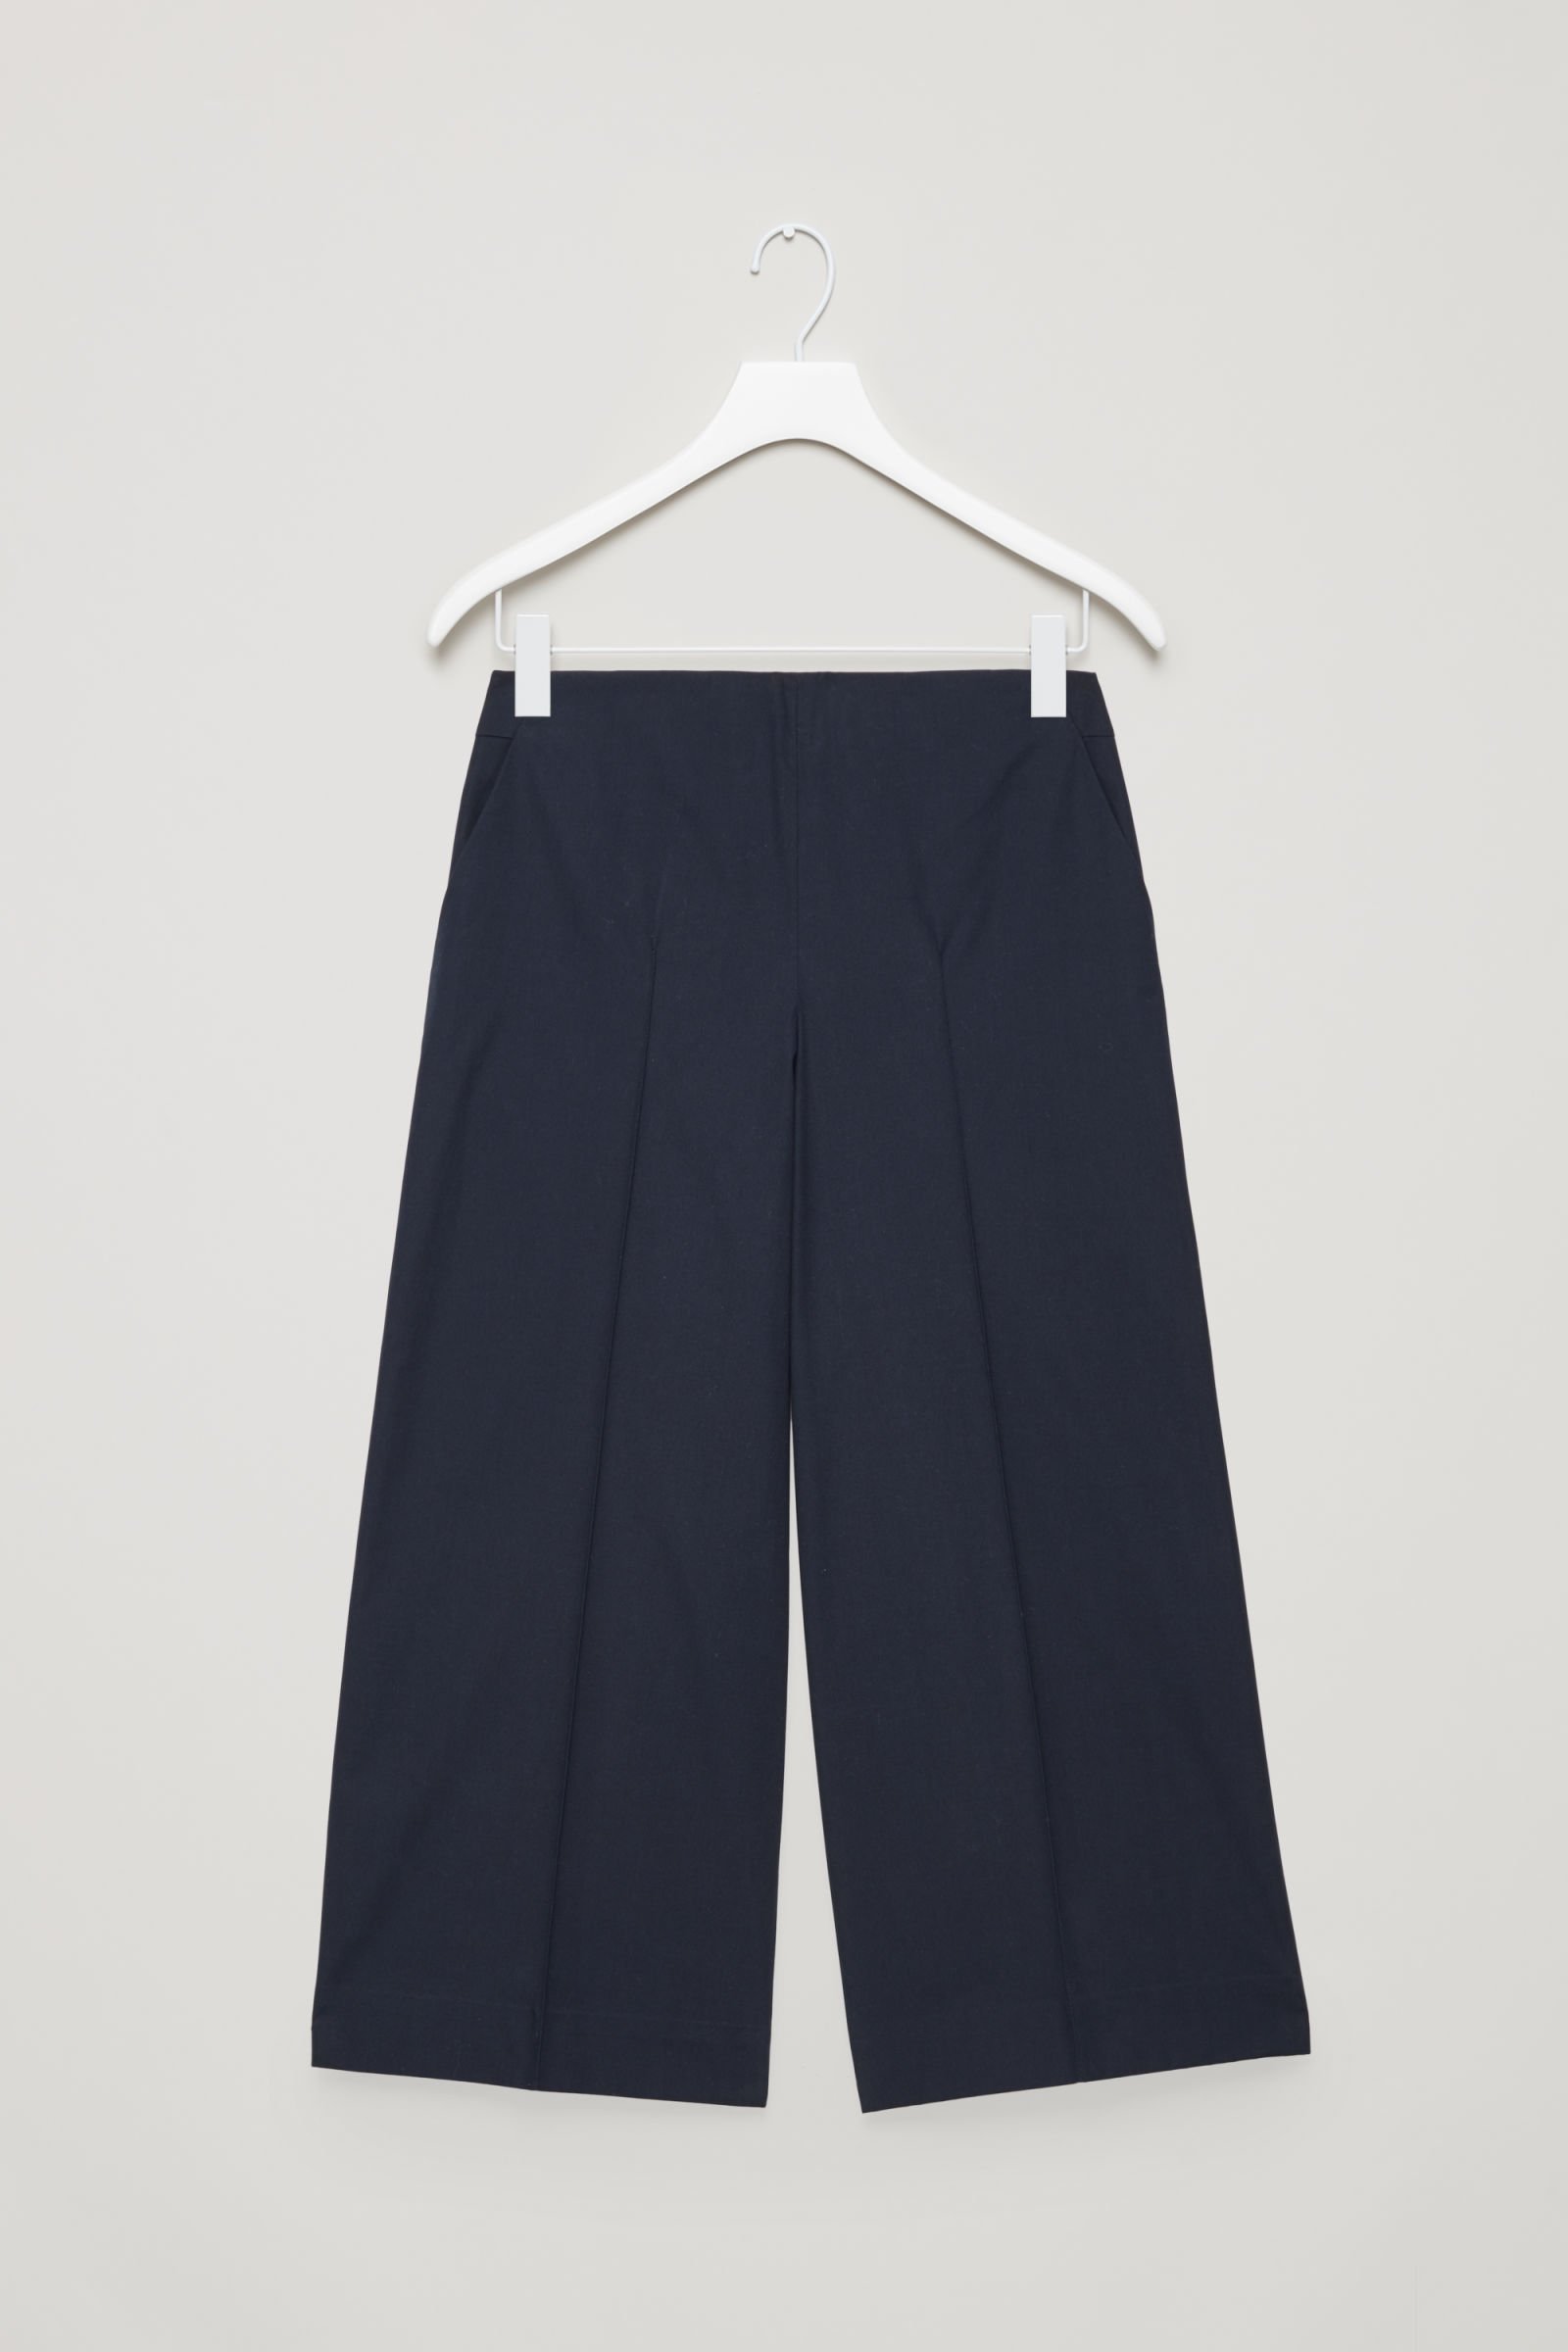 COS Culottes with Pintuck Detail | Endource